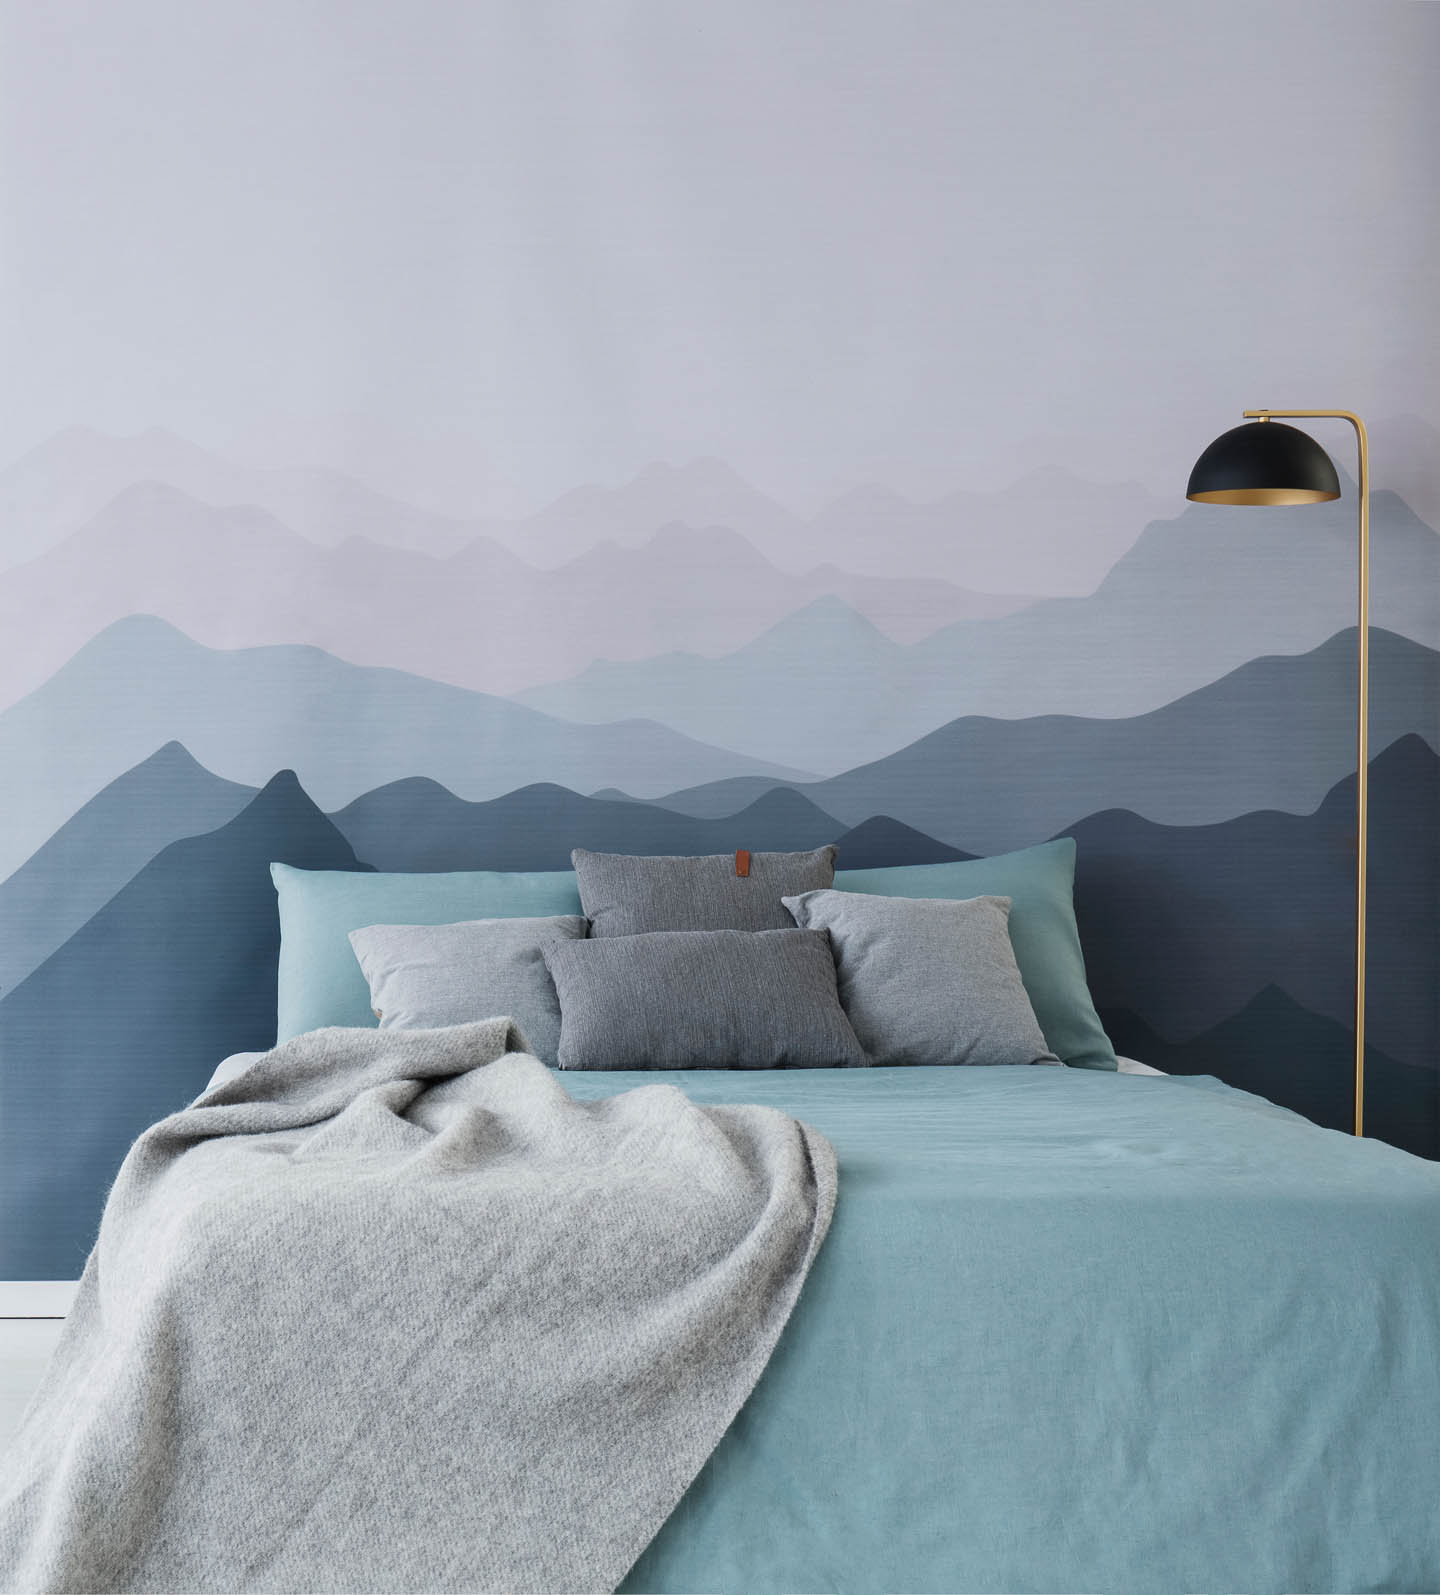 A mountain mural painted in blue behind a bed with aqua and gray bedding